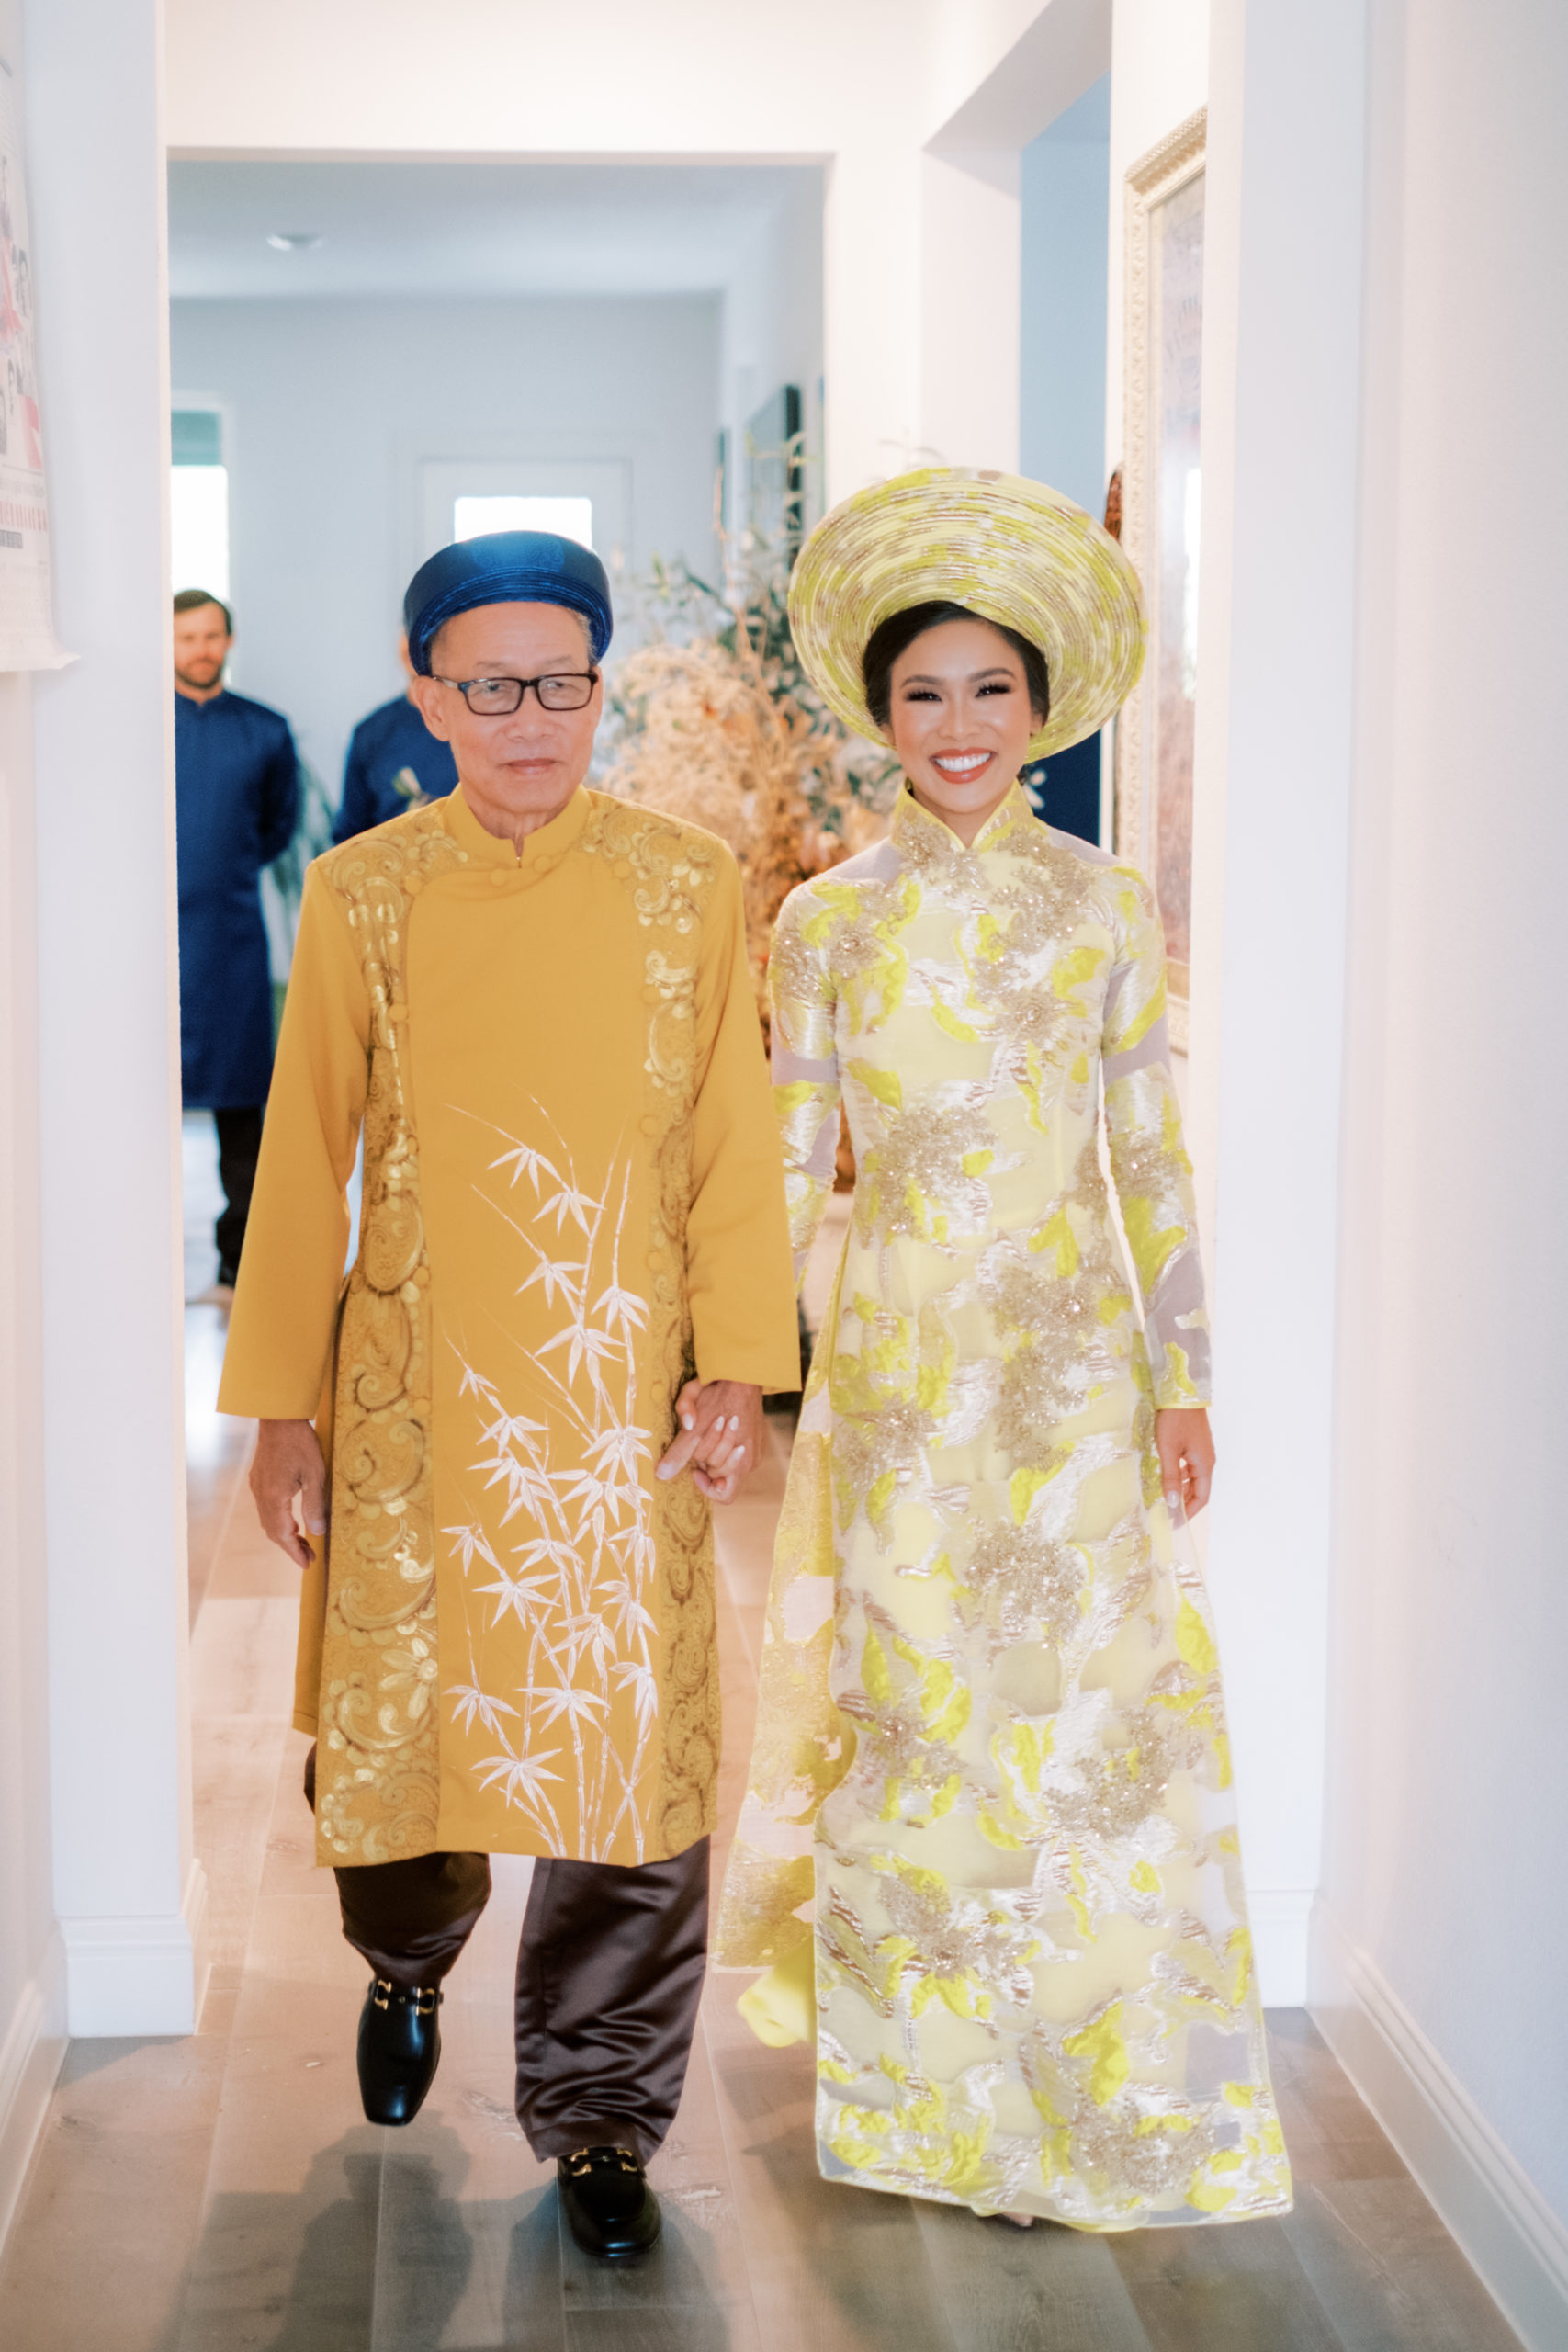 Blogger Hoang-Kim Cung and her Father Cung Nhat Thanh during her Vietnamese Wedding Ceremony.